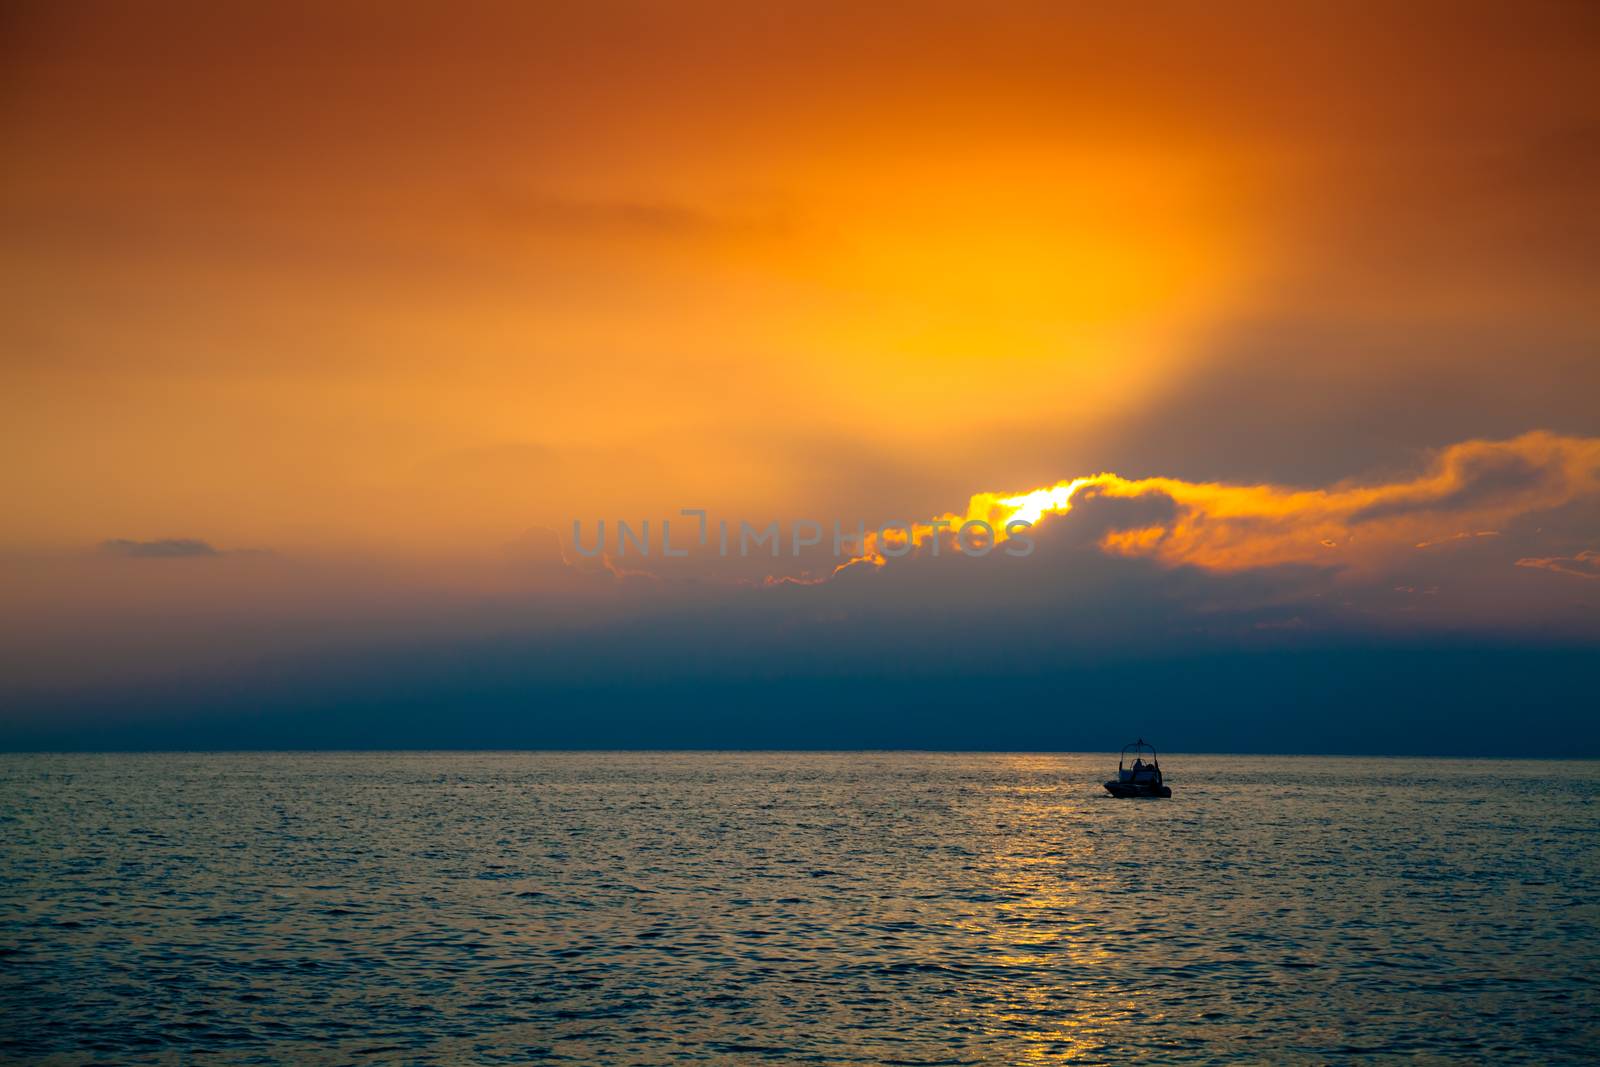 Lone boat in the sea at the beautiful sunset